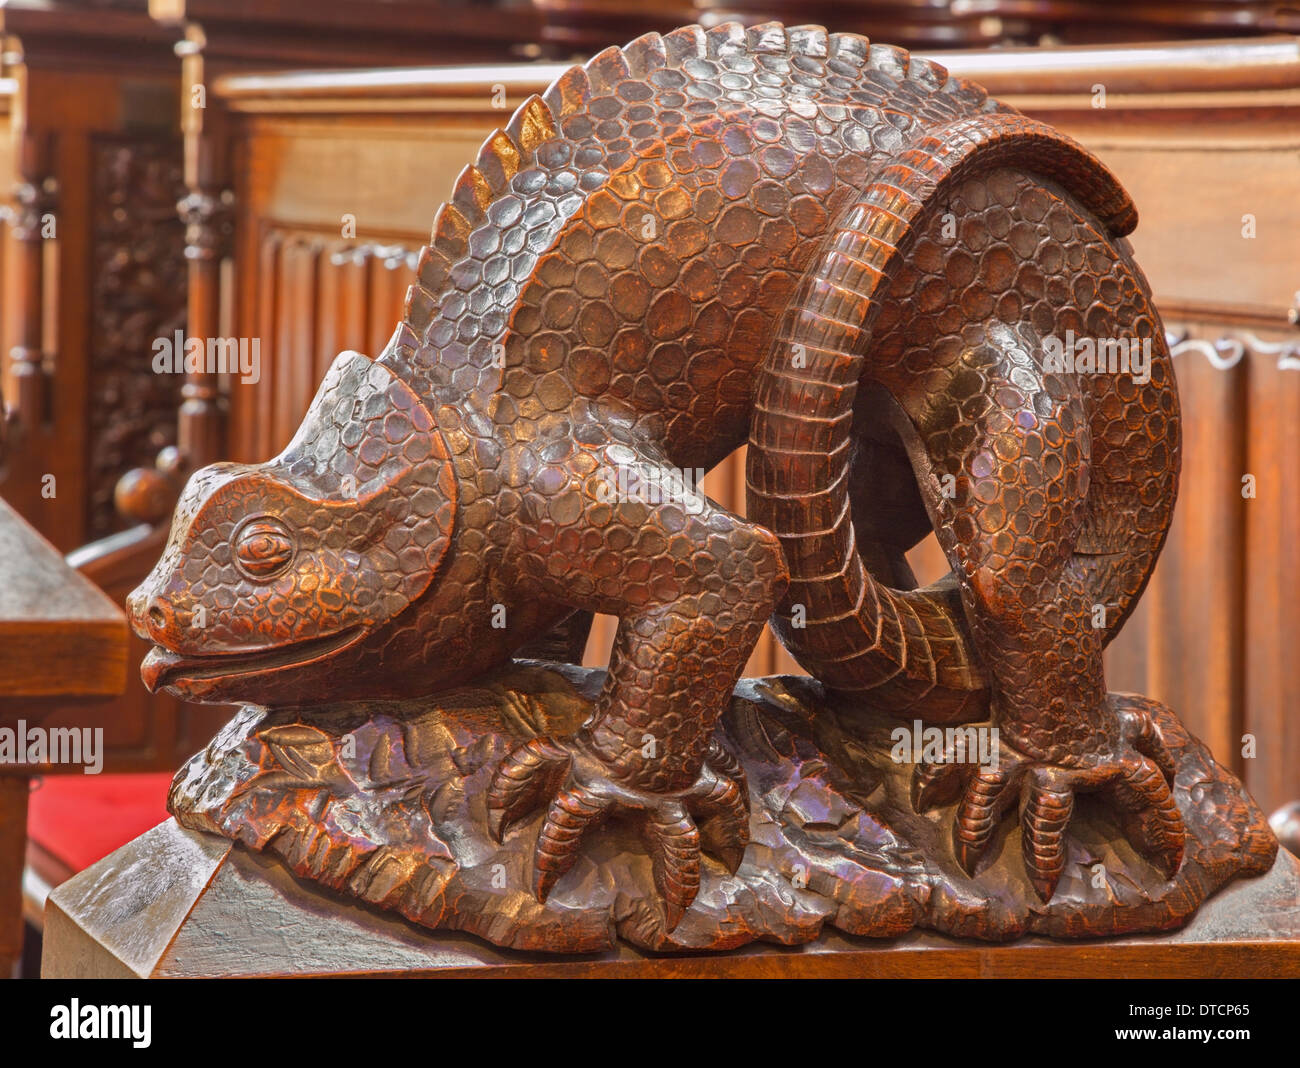 Bratislava - Reptile symbolic carved sculpture from bench in presbytery in st. Matins cathedral Stock Photo